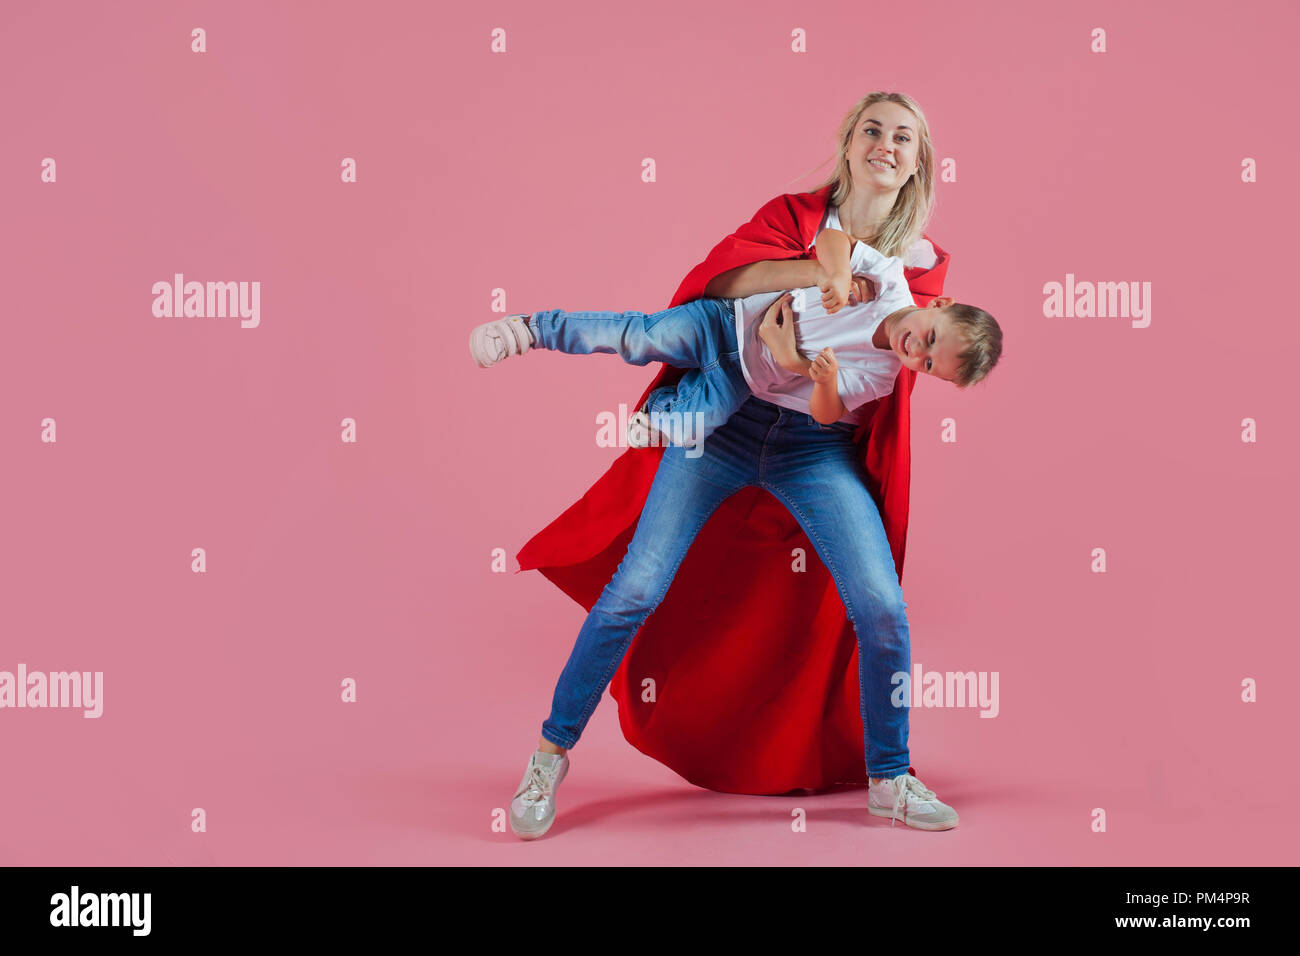 Mom is a superhero. happy family, a young blond woman in a red Cape and her son jumps and takes off, pink background Stock Photo